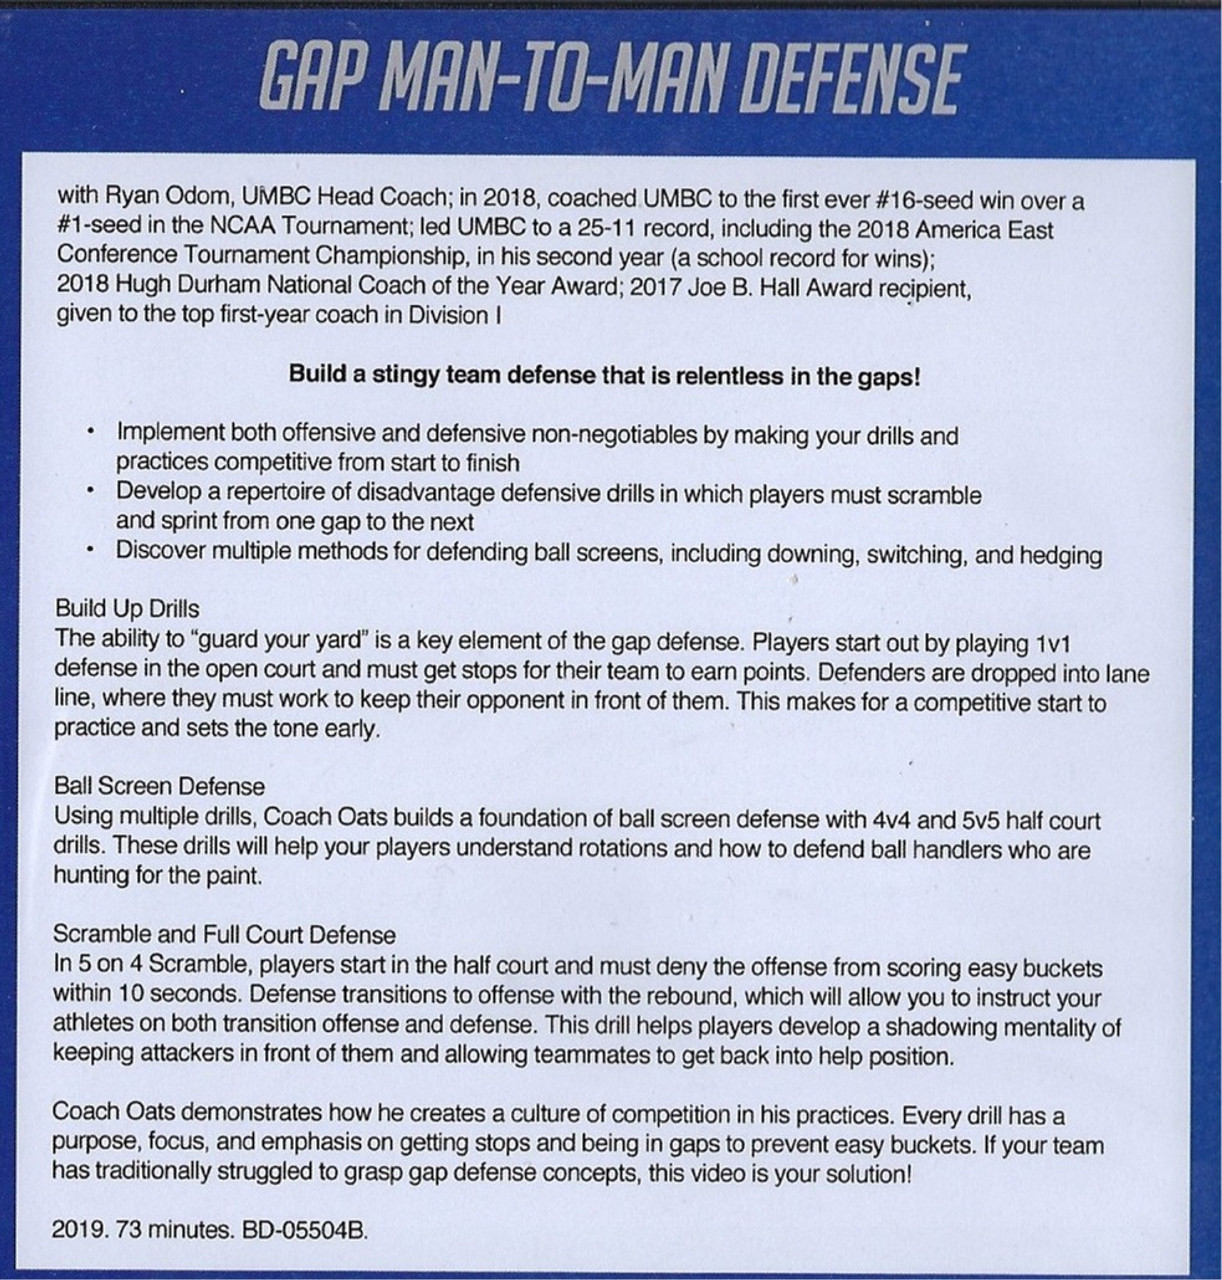 Gap Man to Man Defense in Basketball by Nate Oats